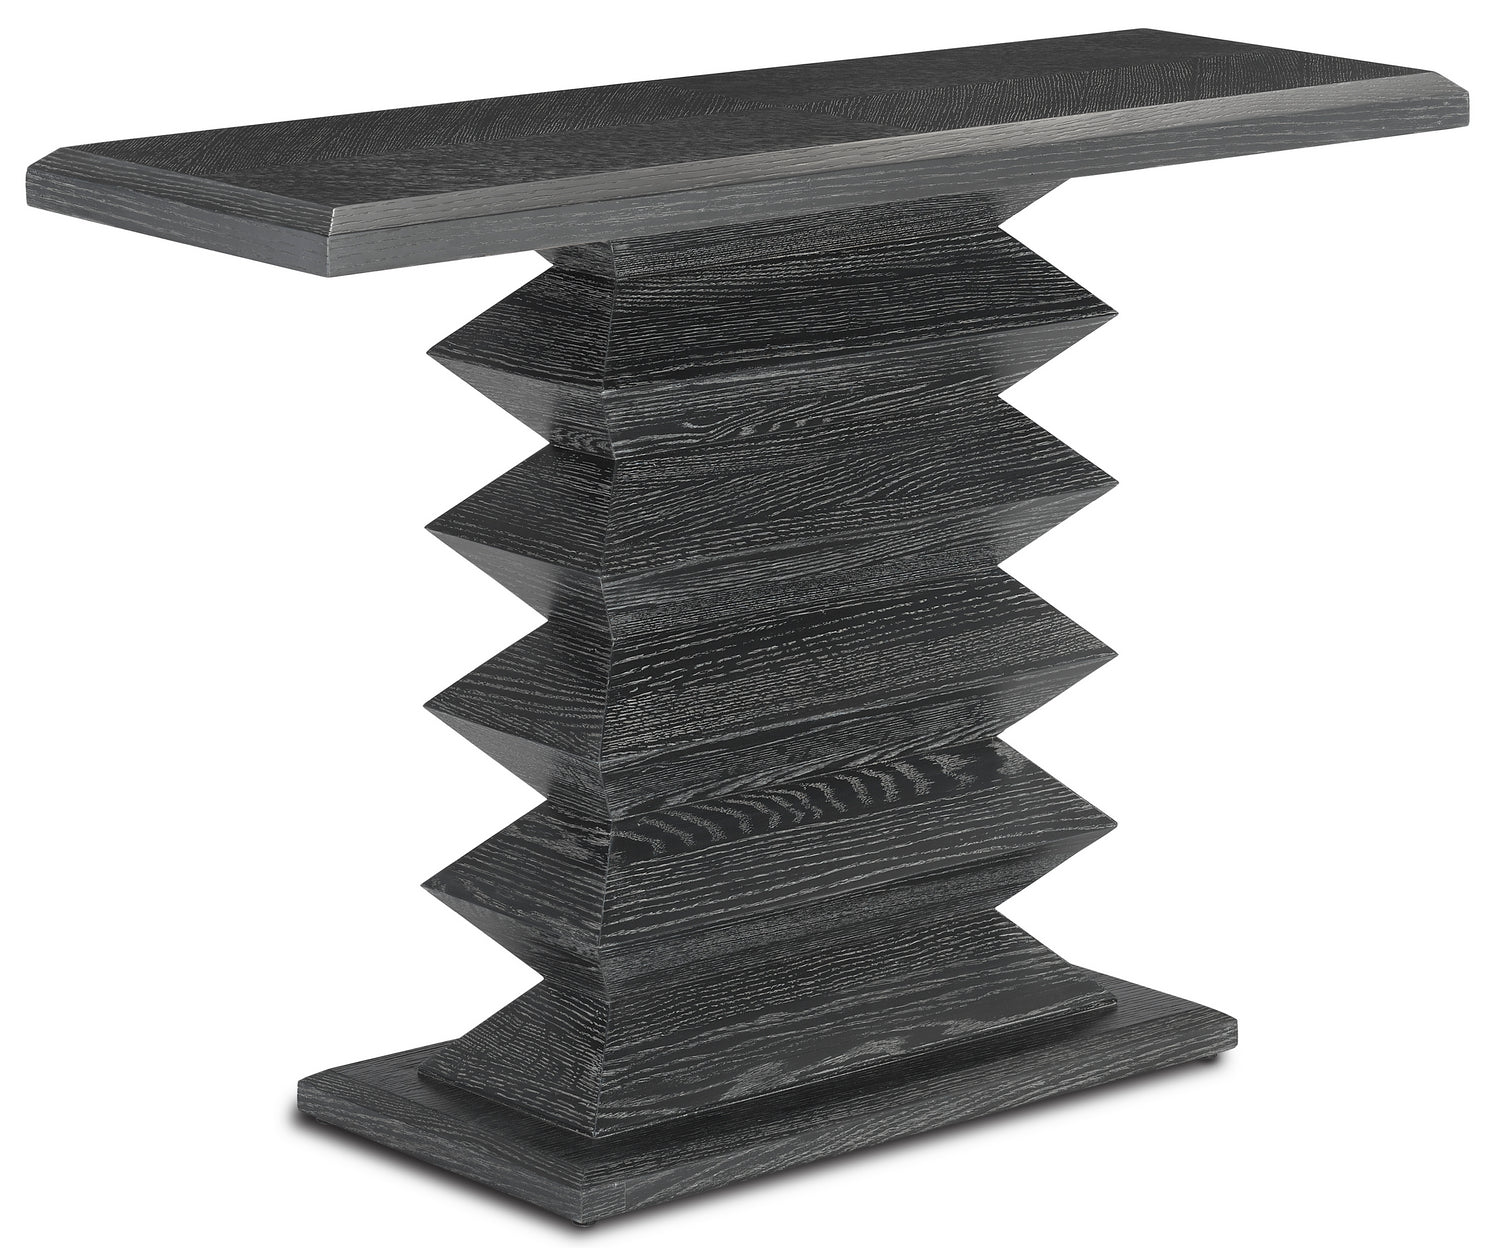 Console Table from the Sayan collection in Cerused Black finish